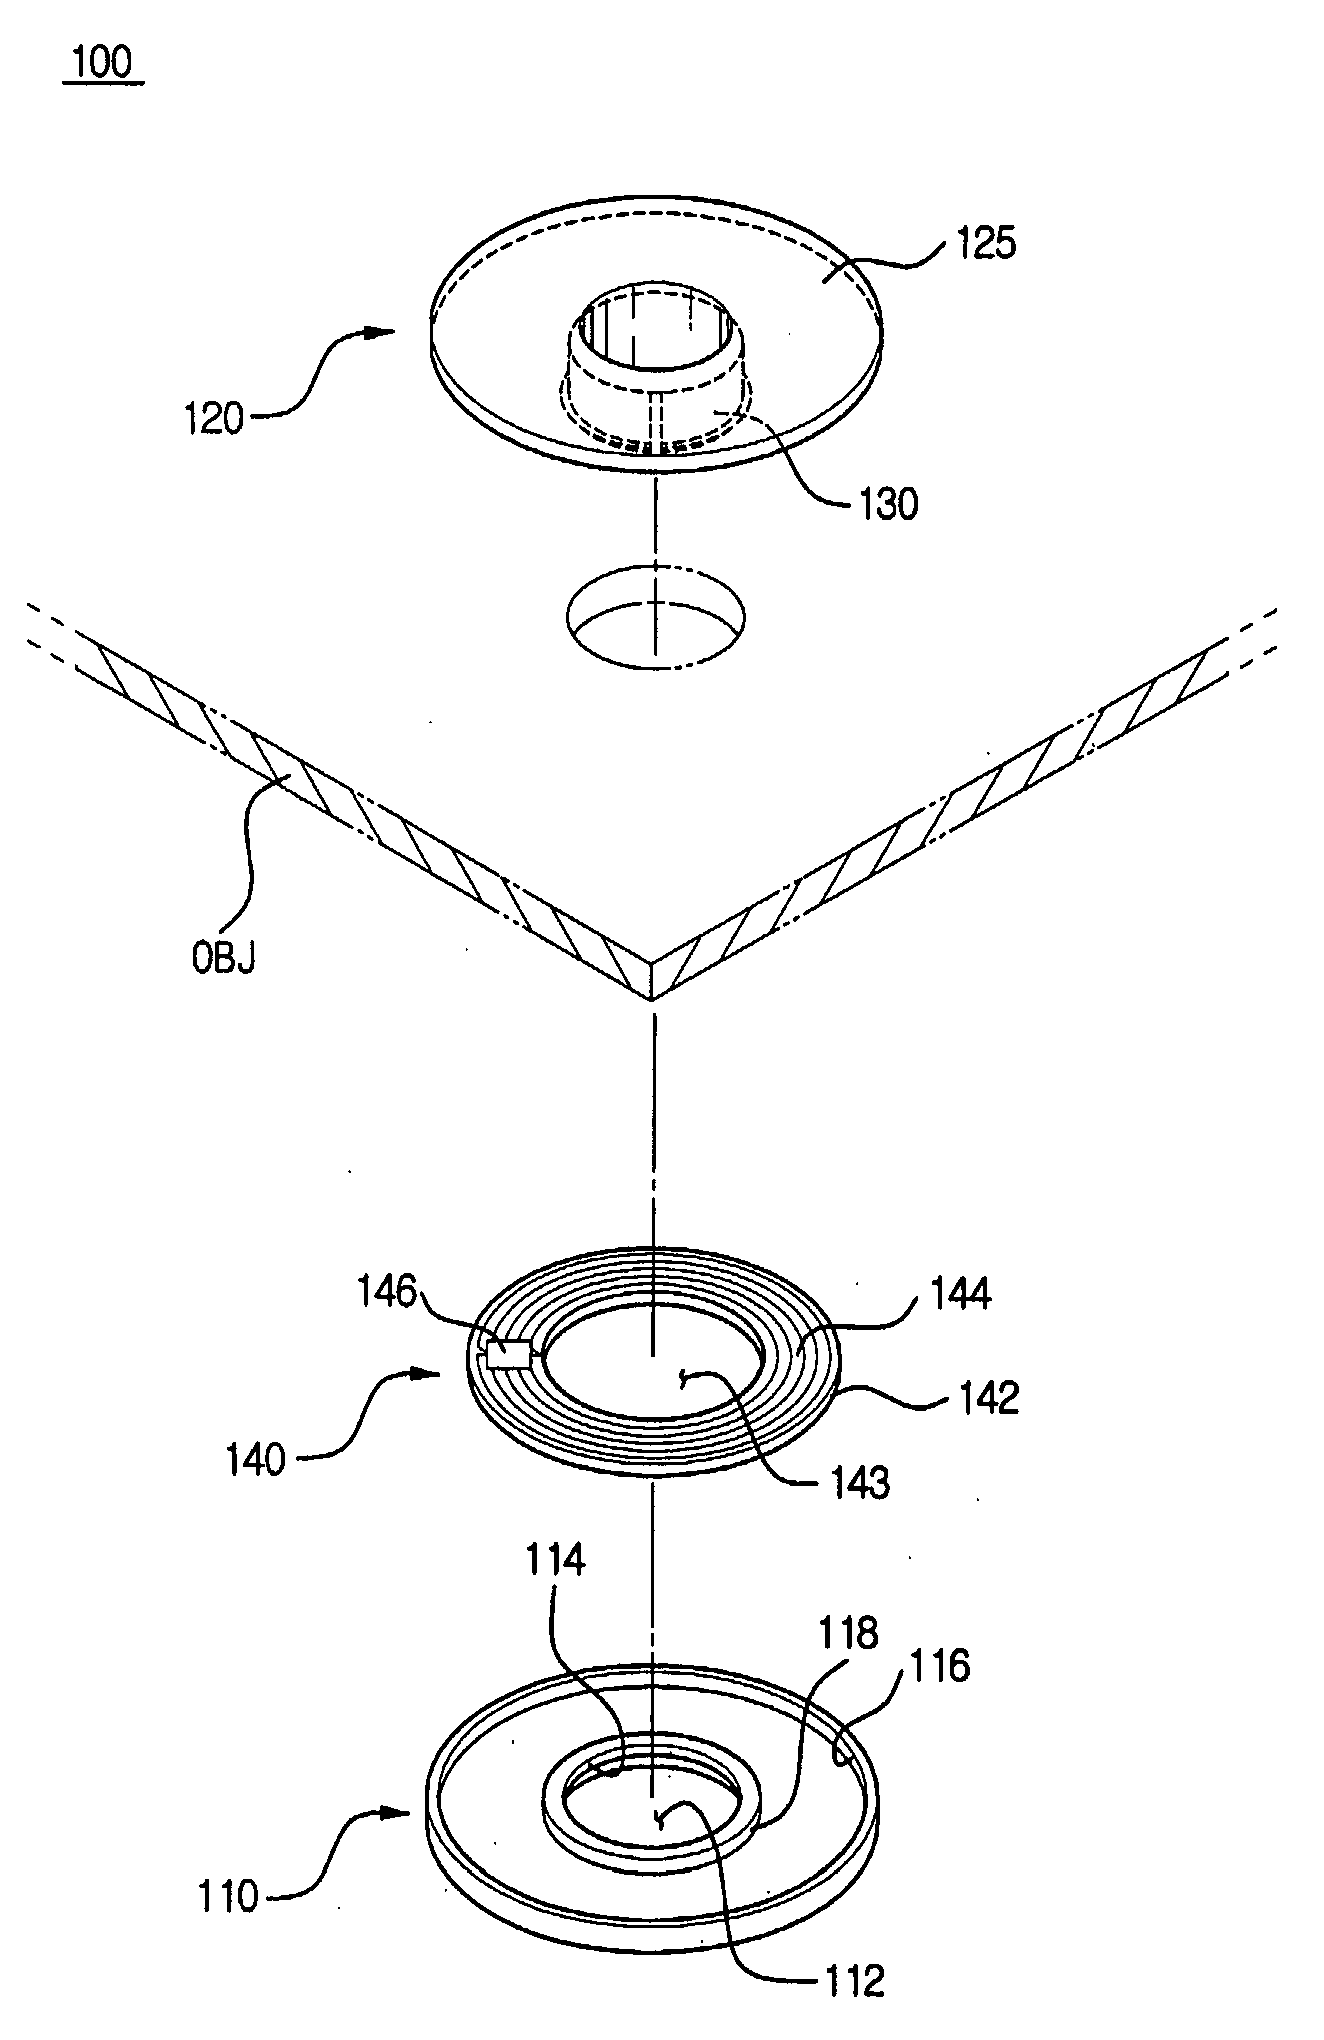 Eyelet for a radio frequency identification